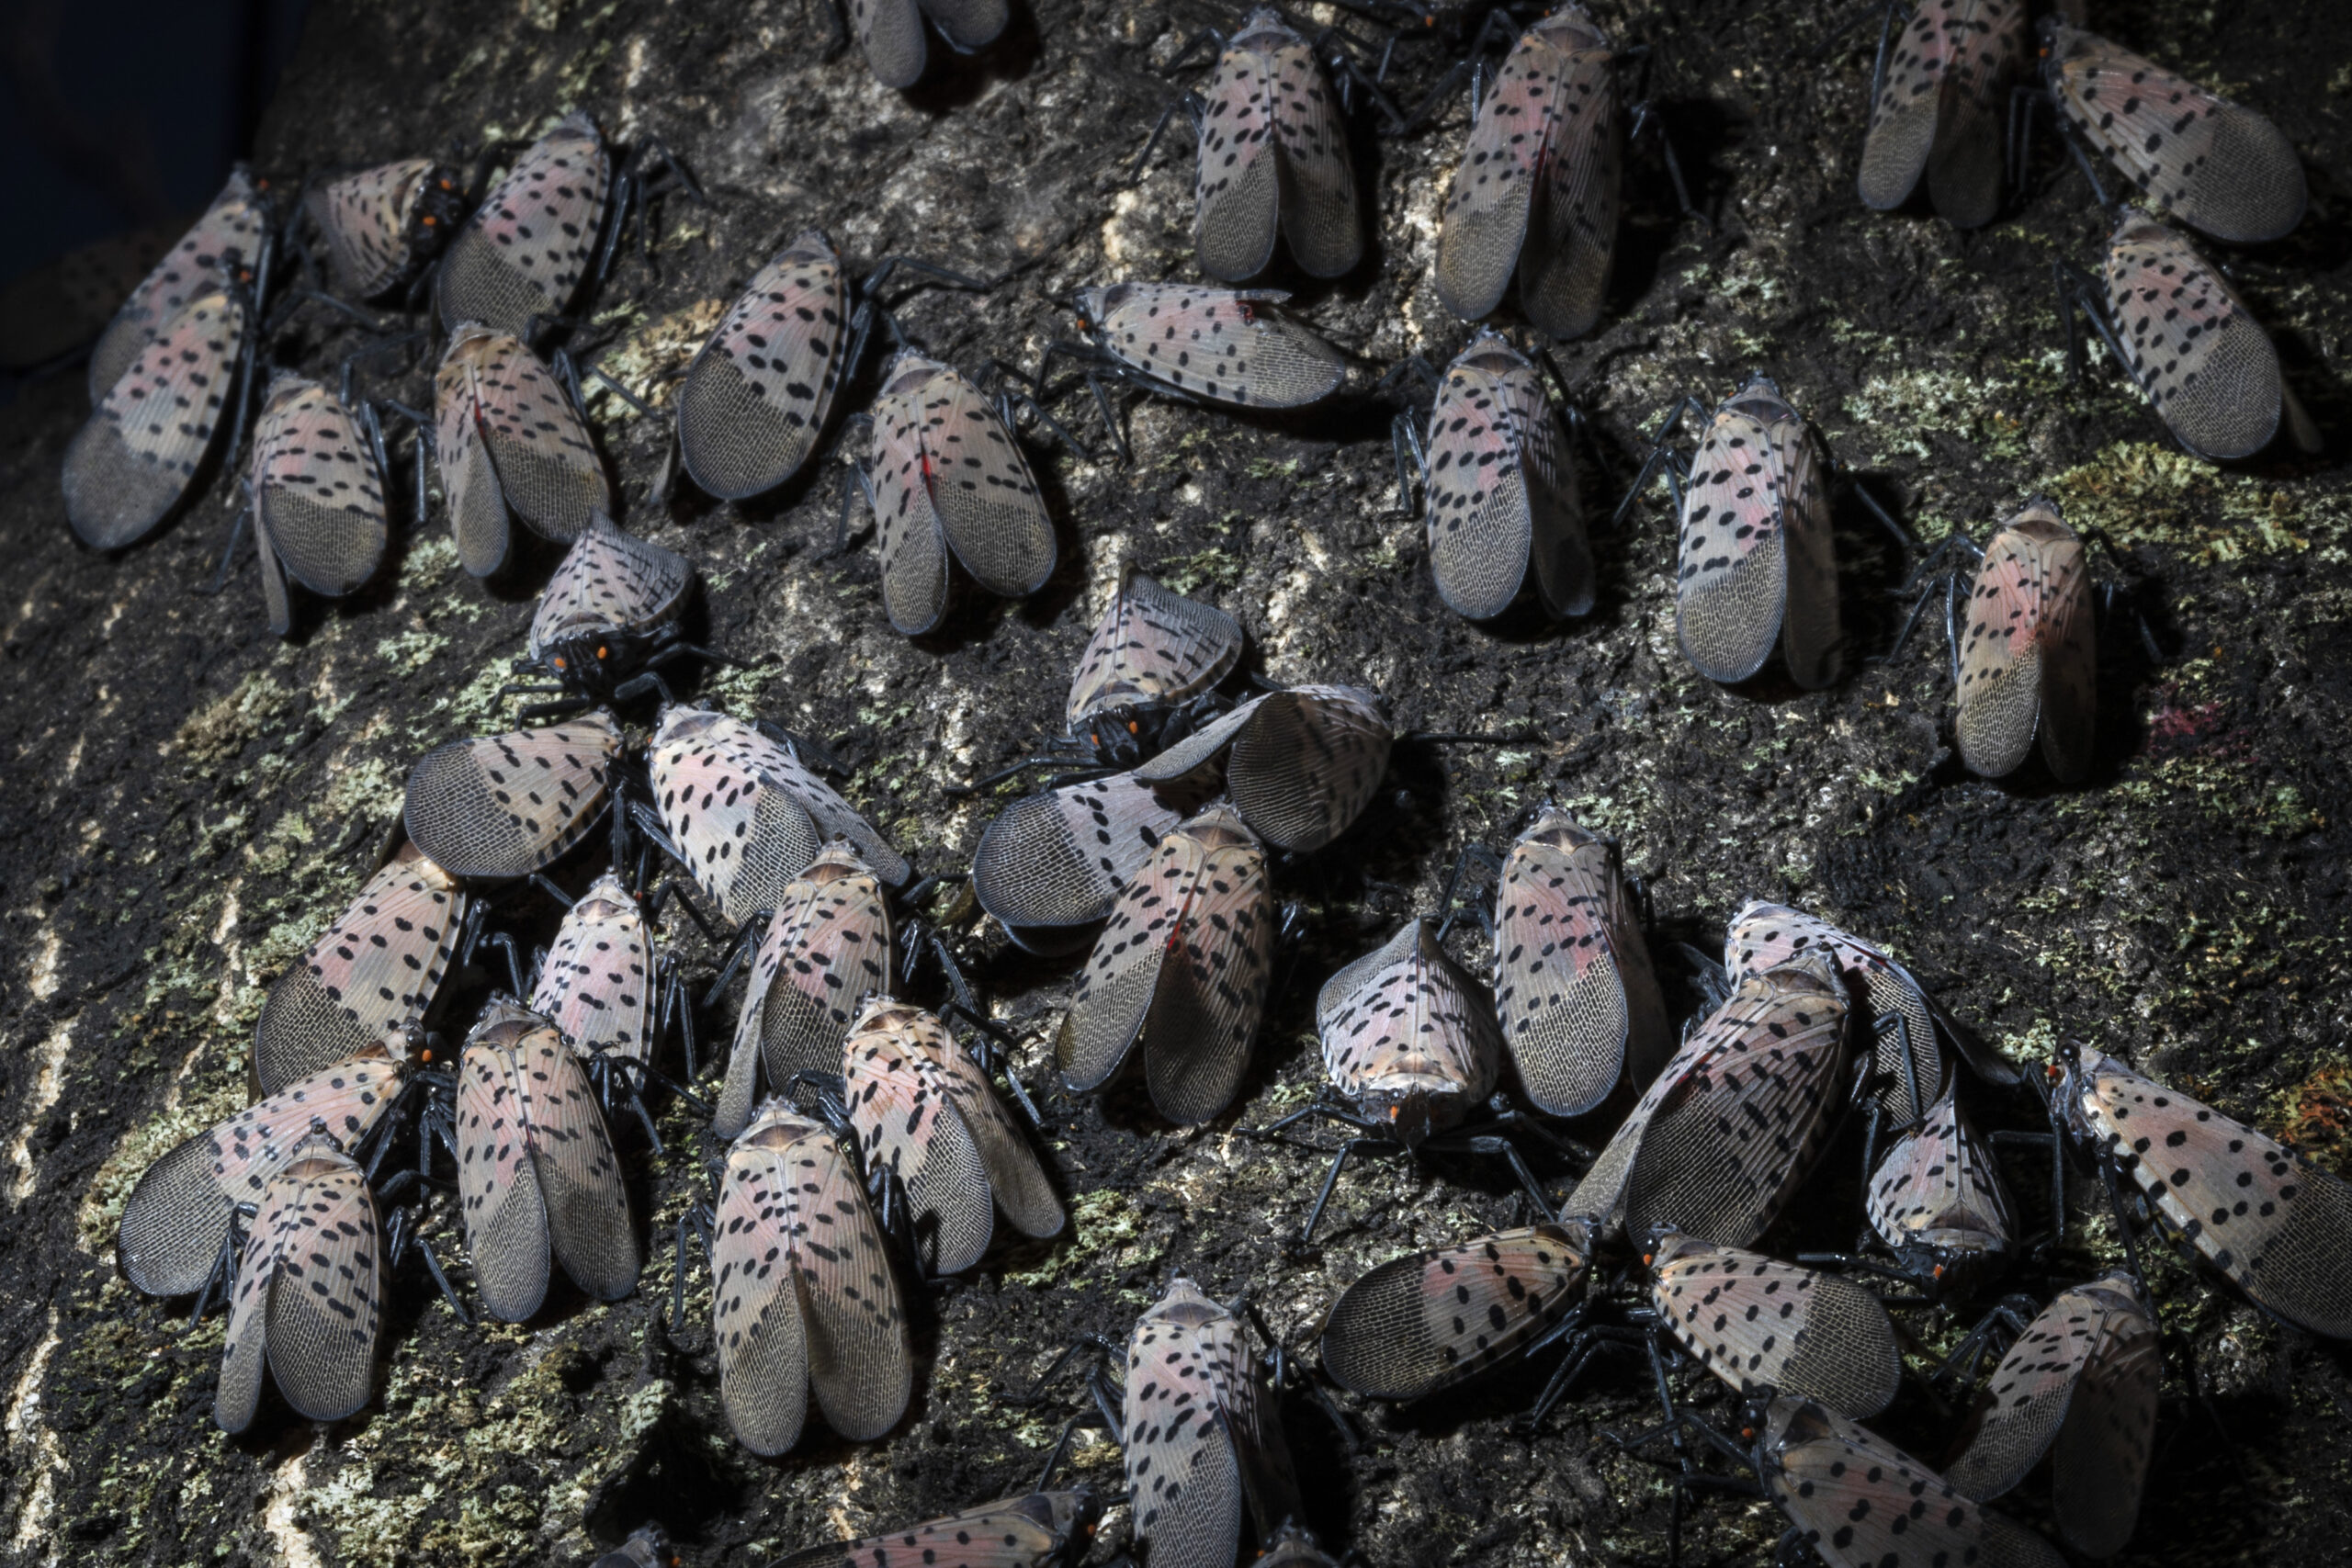 Invasive spotted lanternfly expected to arrive in Wisconsin, insect expert says